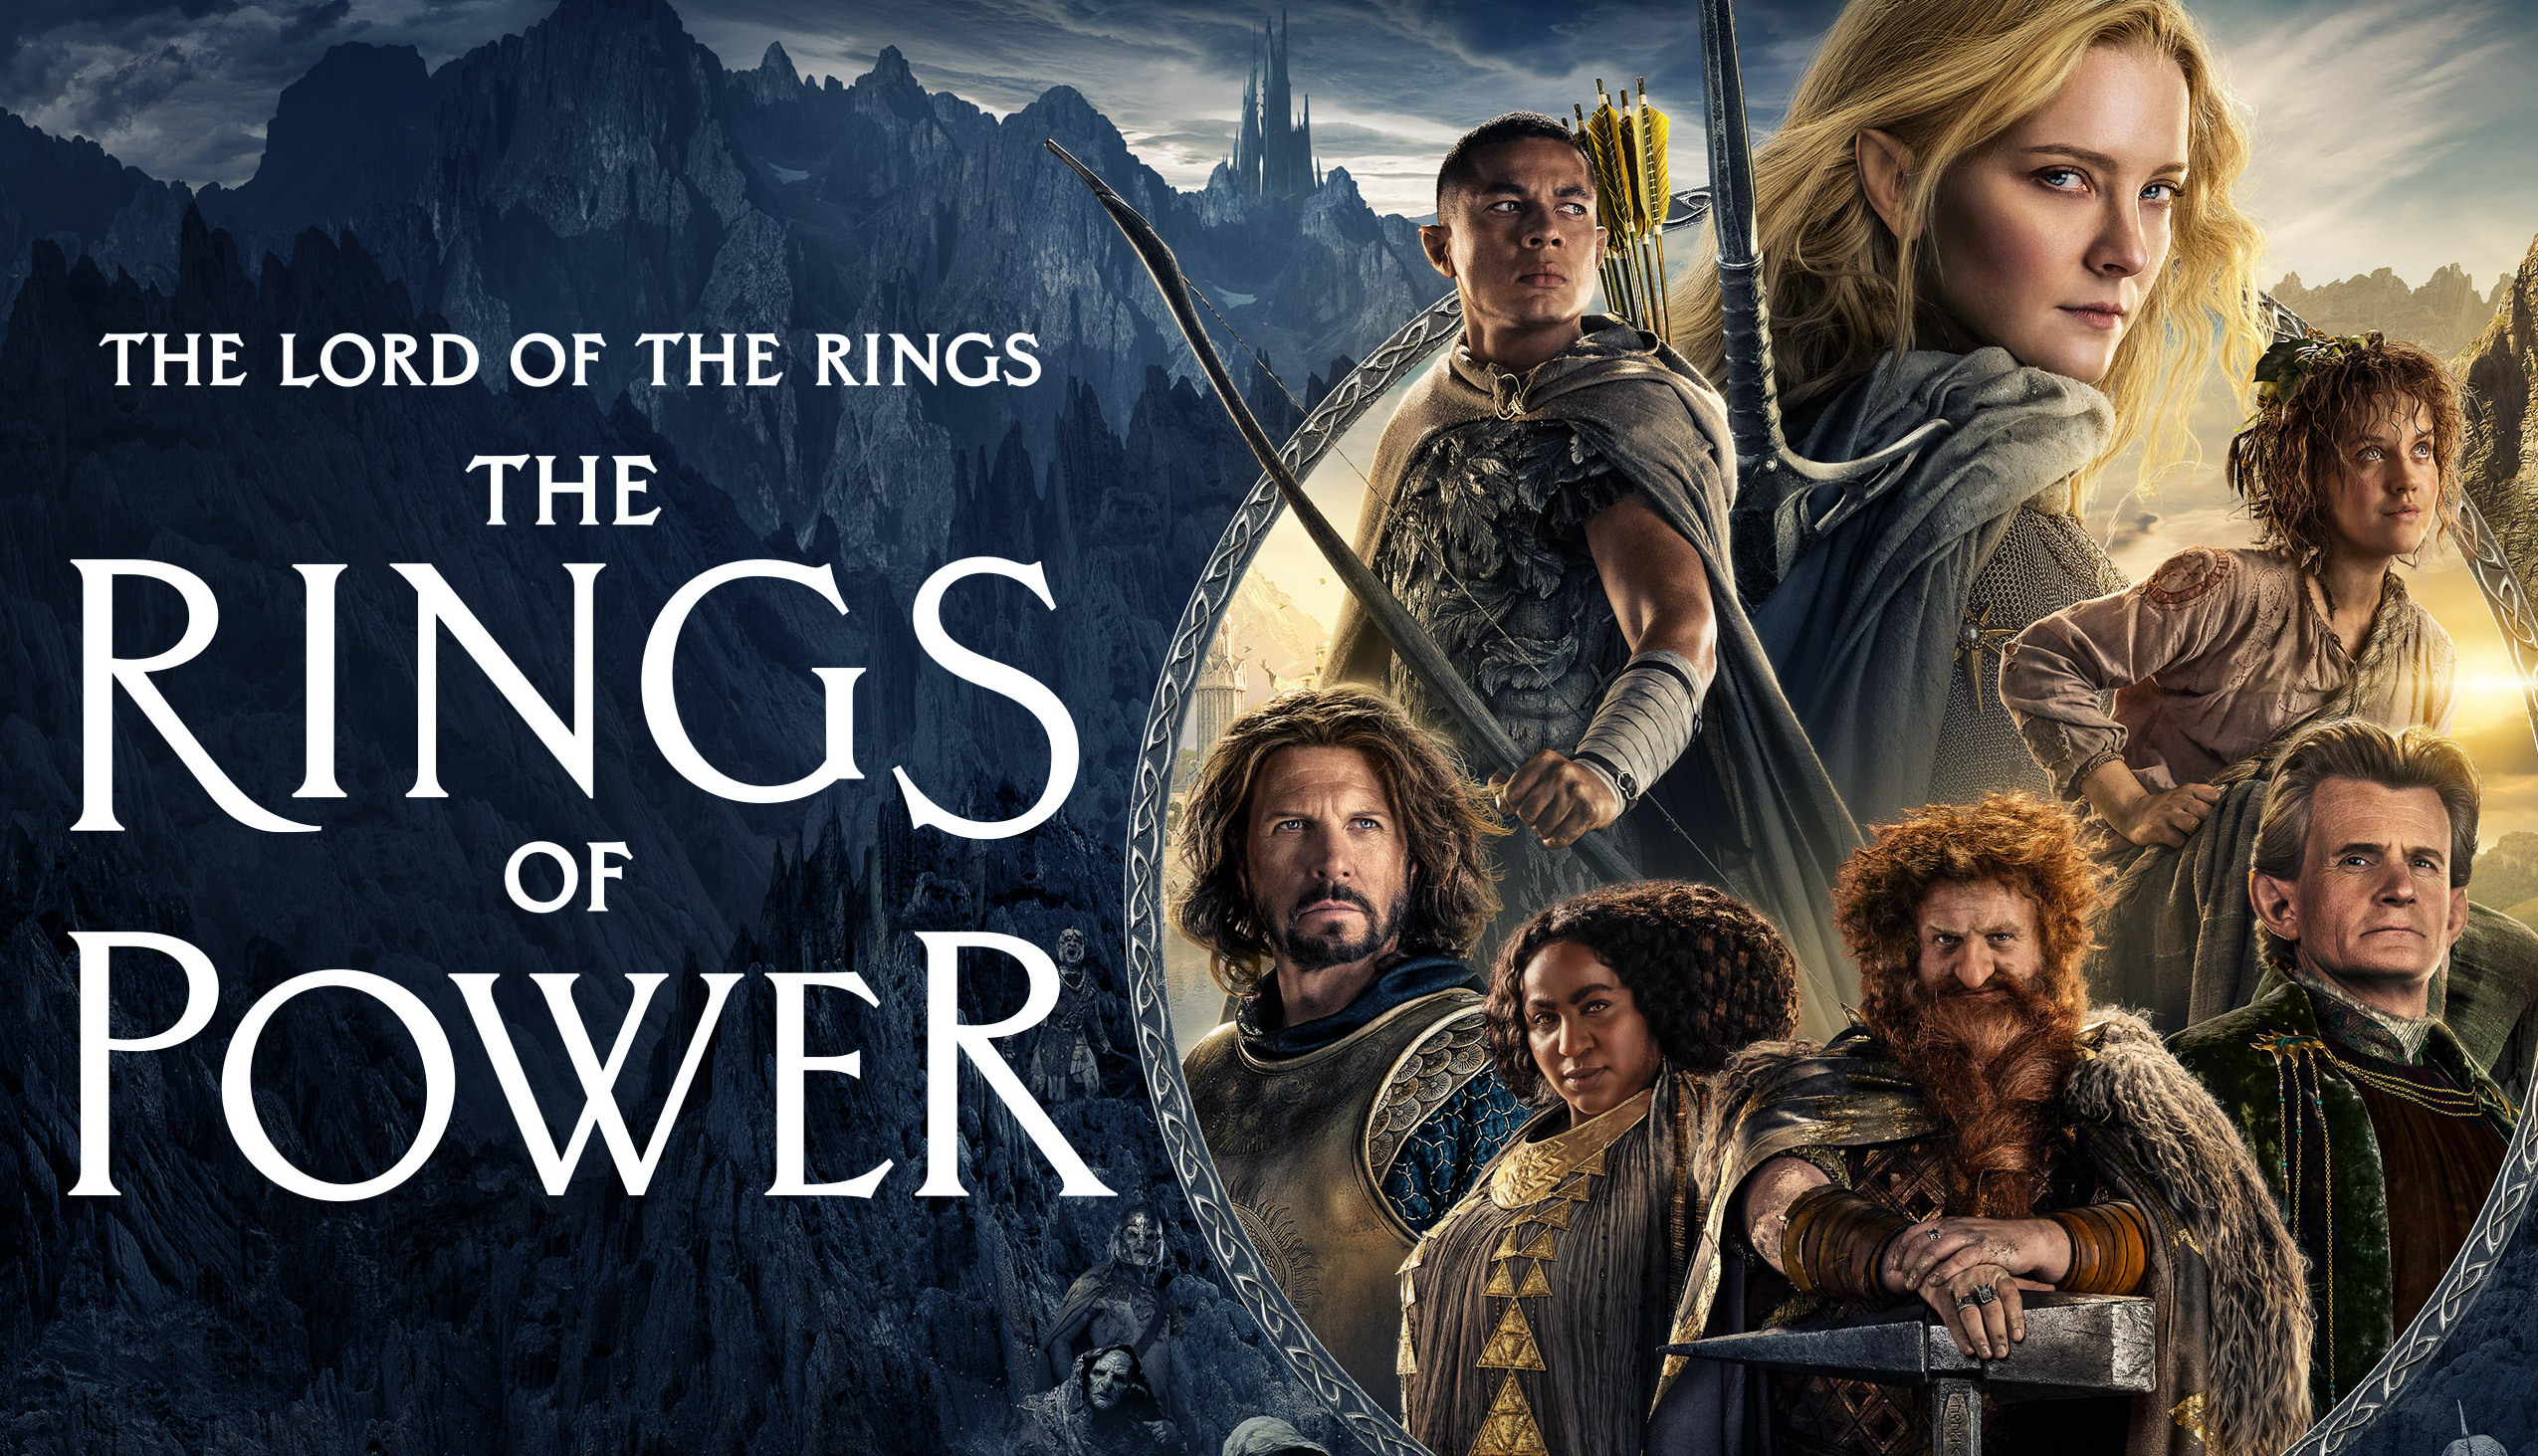 The Rings of Power': Where did the cast study at?